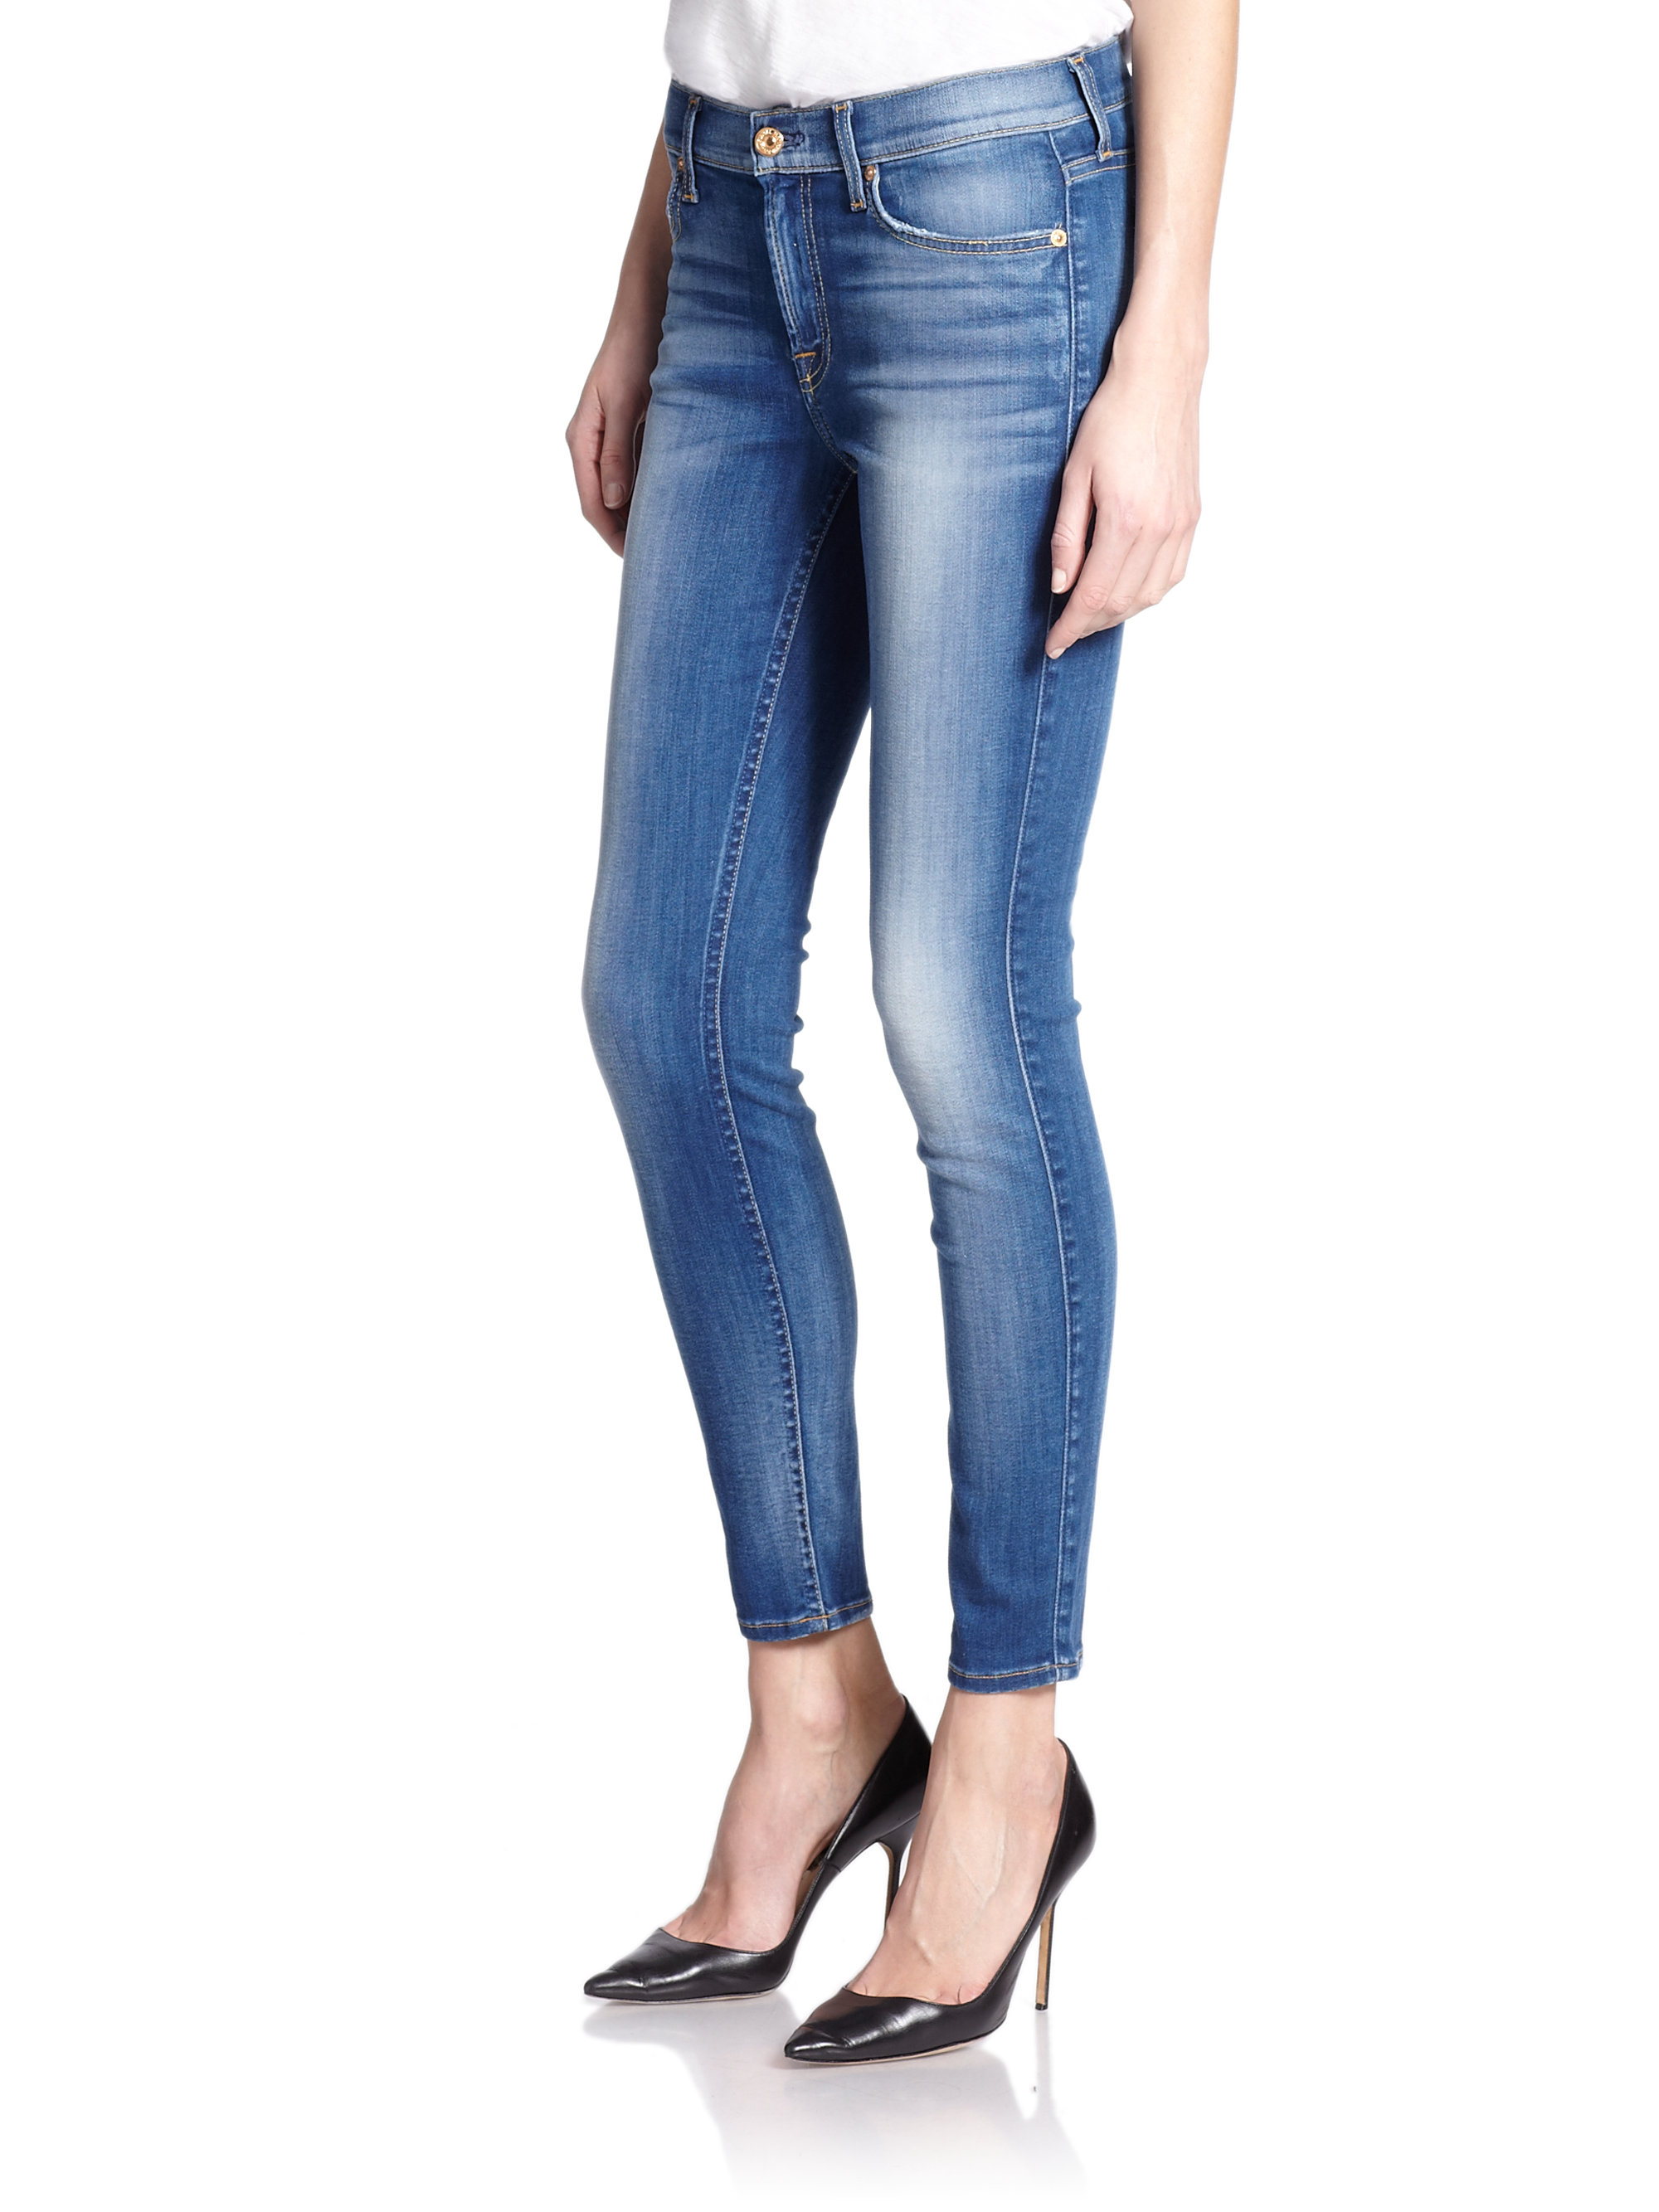 Lyst - 7 for all mankind Skinny Ankle Jeans in Blue